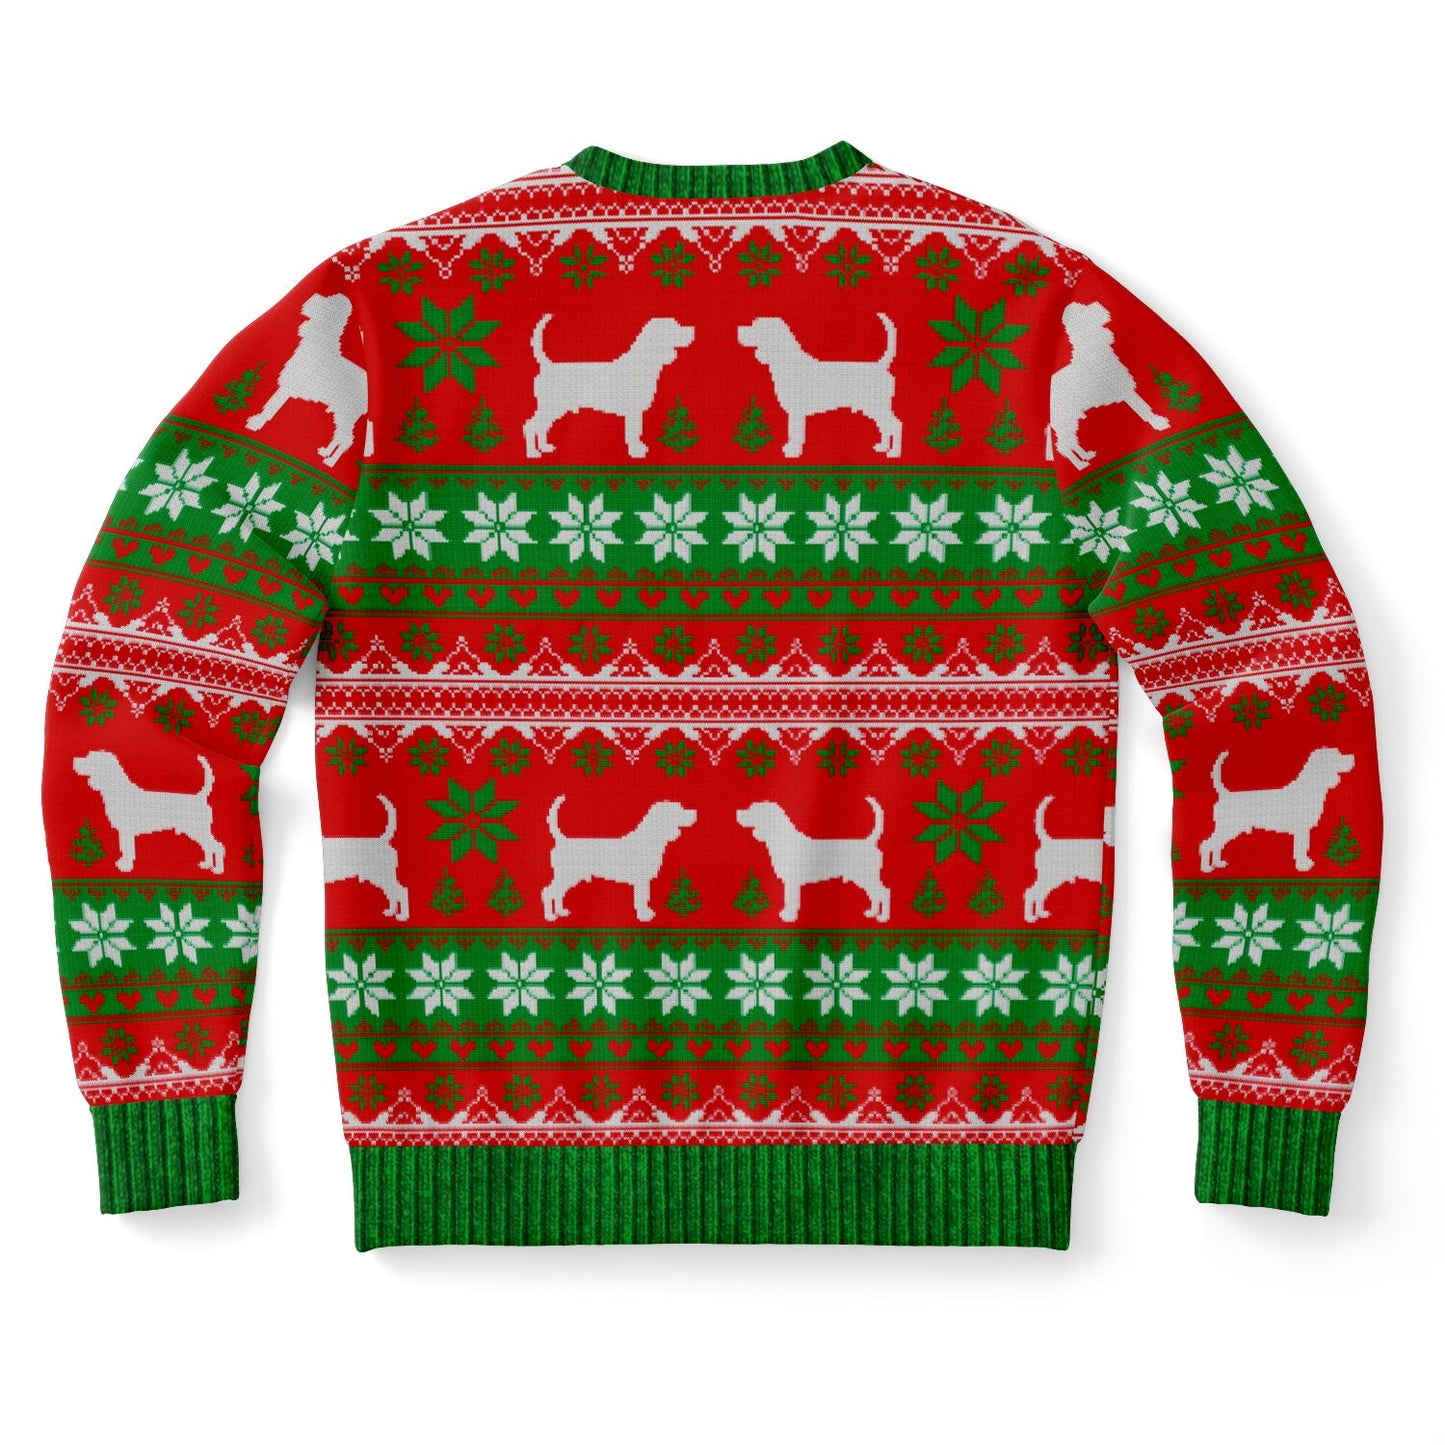 Beagle Bells Ugly Christmas Sweater